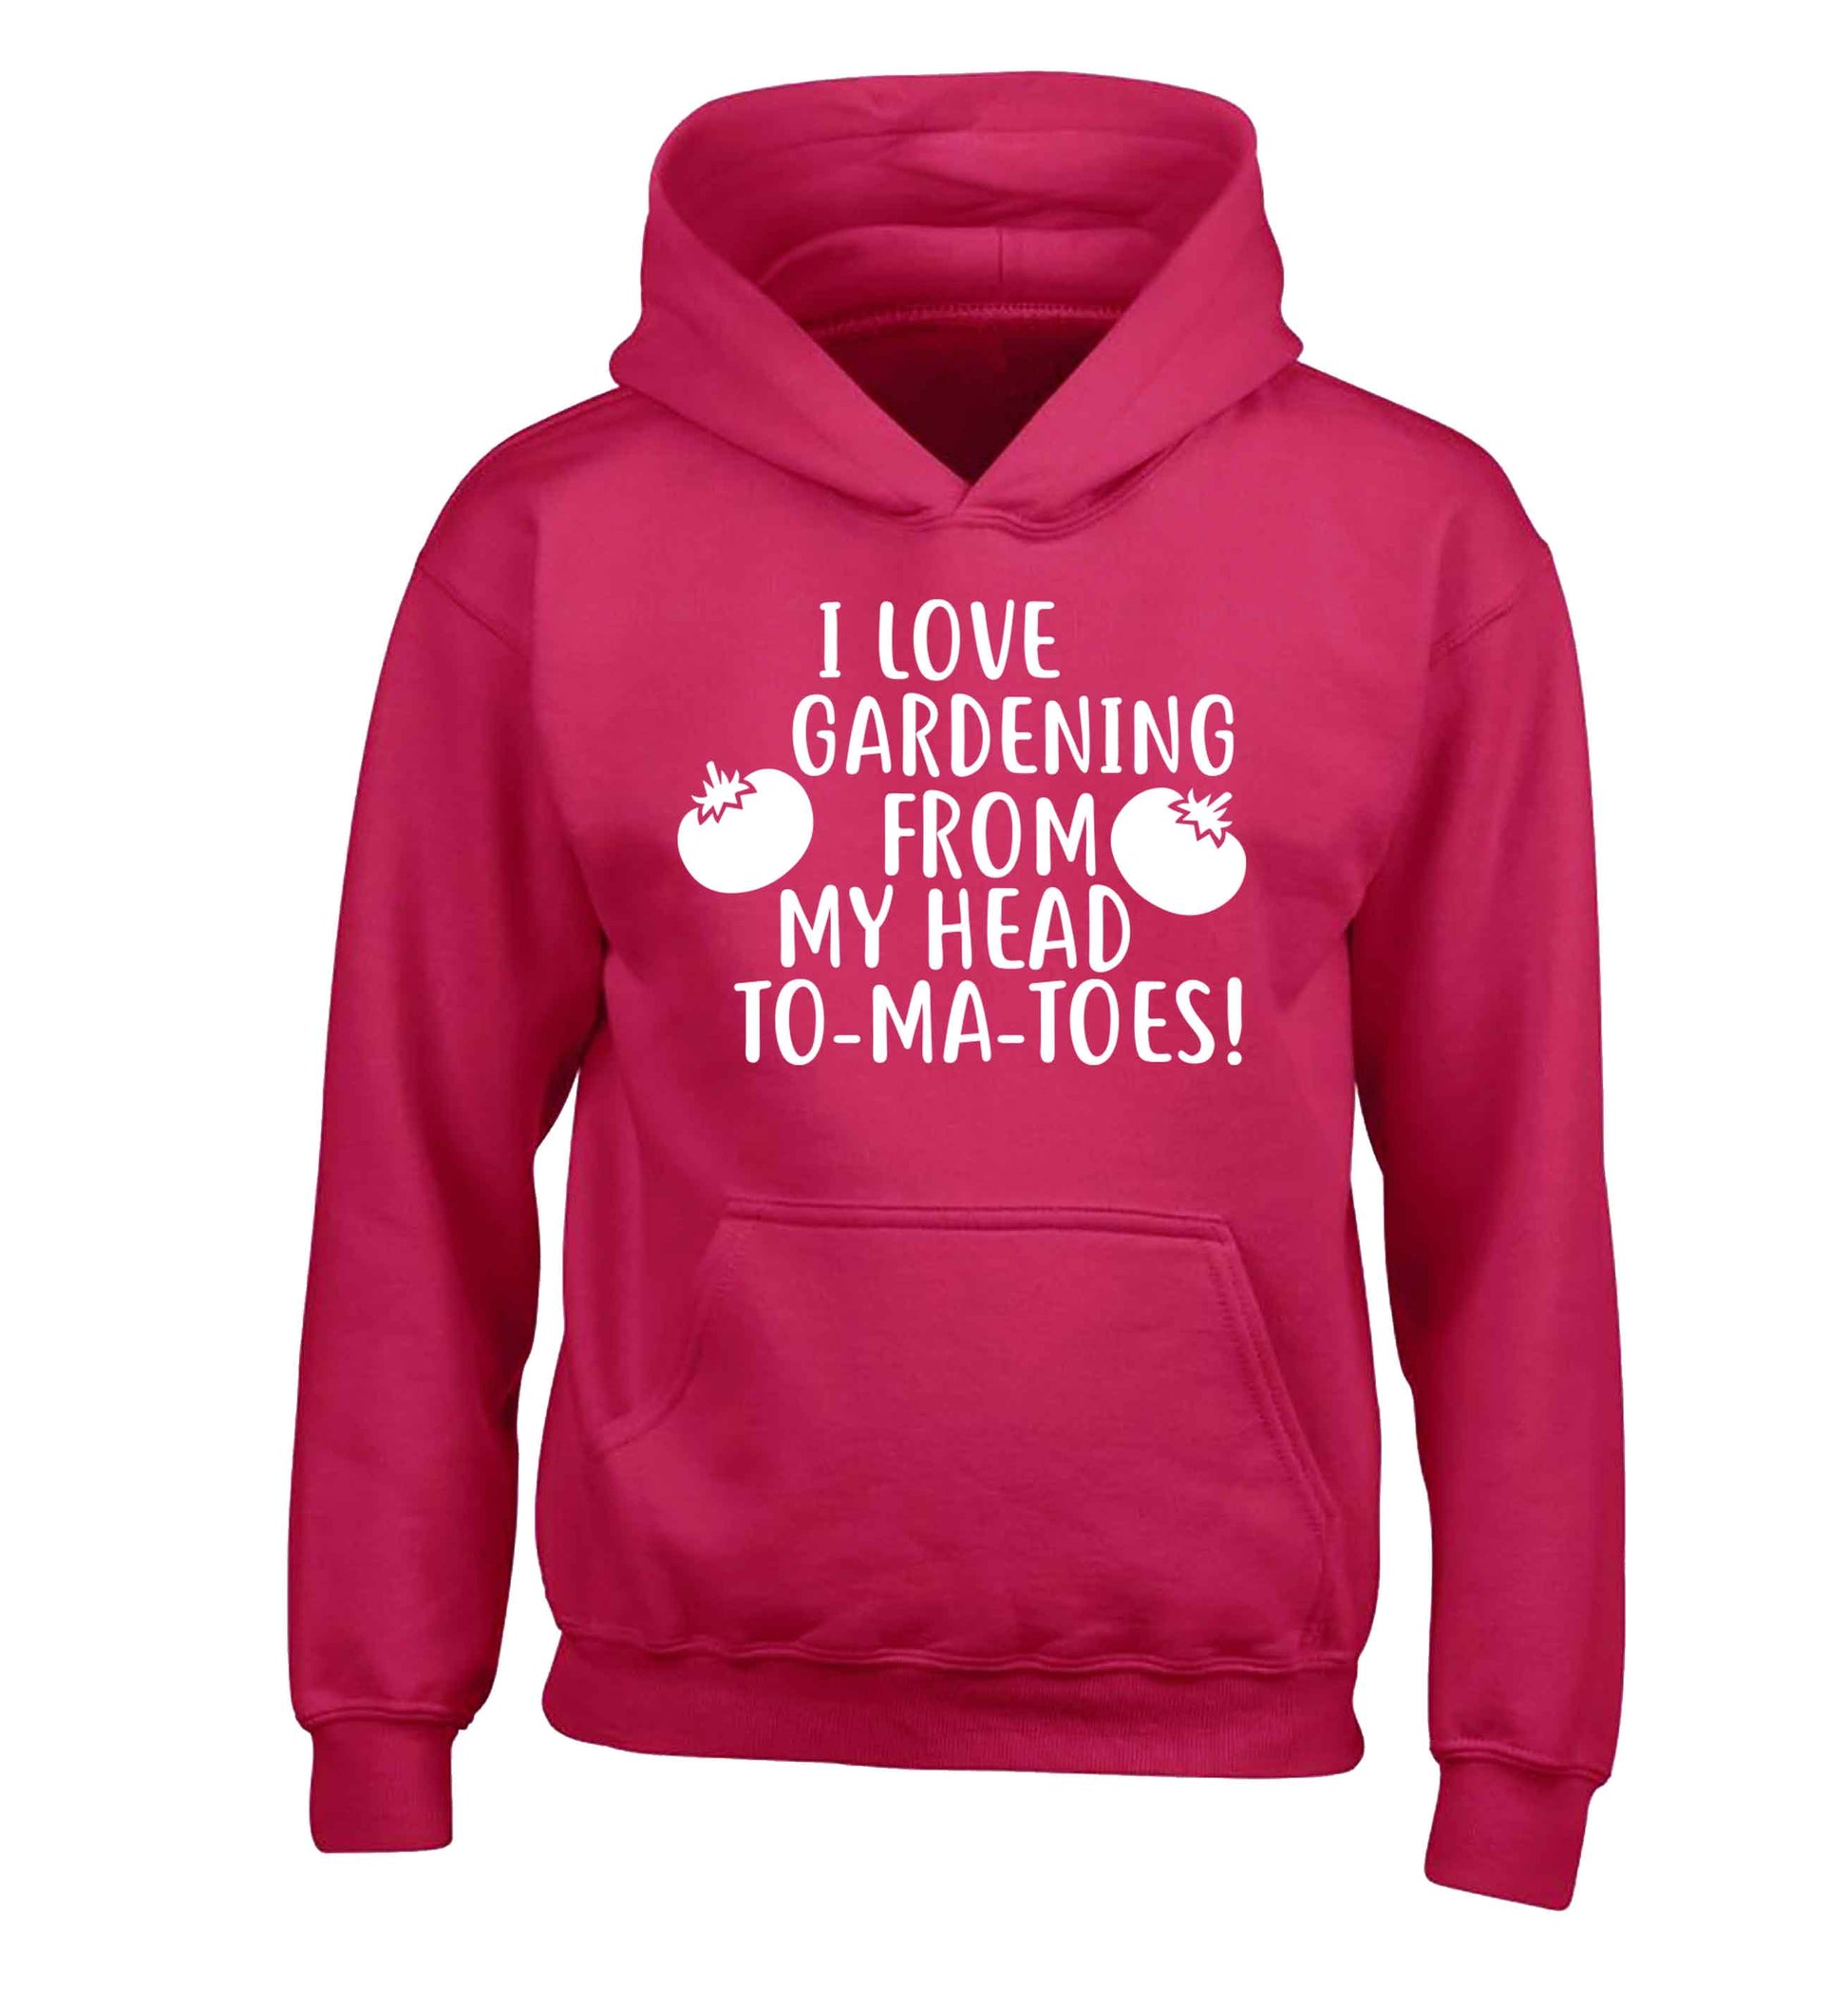 I love gardening from my head to-ma-toes children's pink hoodie 12-13 Years